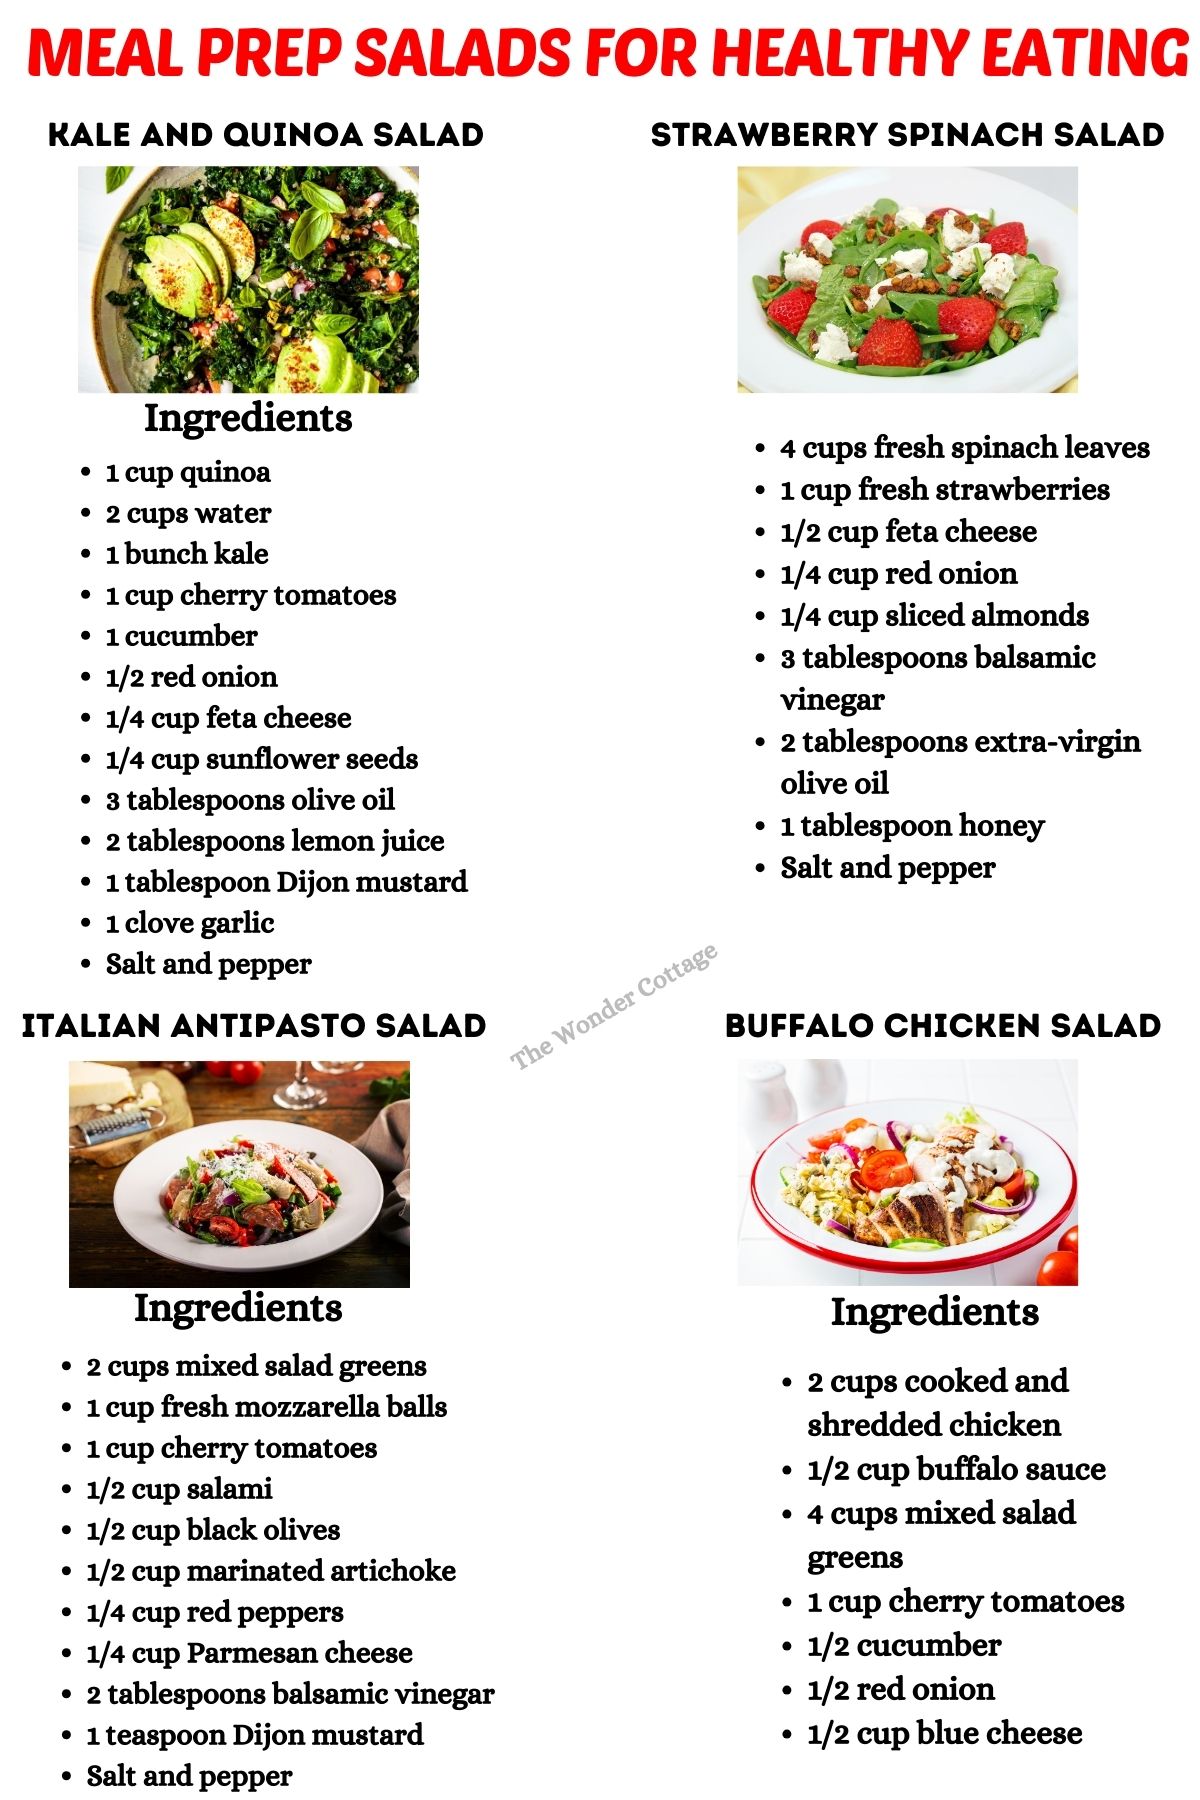  Meal Prep Salads for Healthy Eating